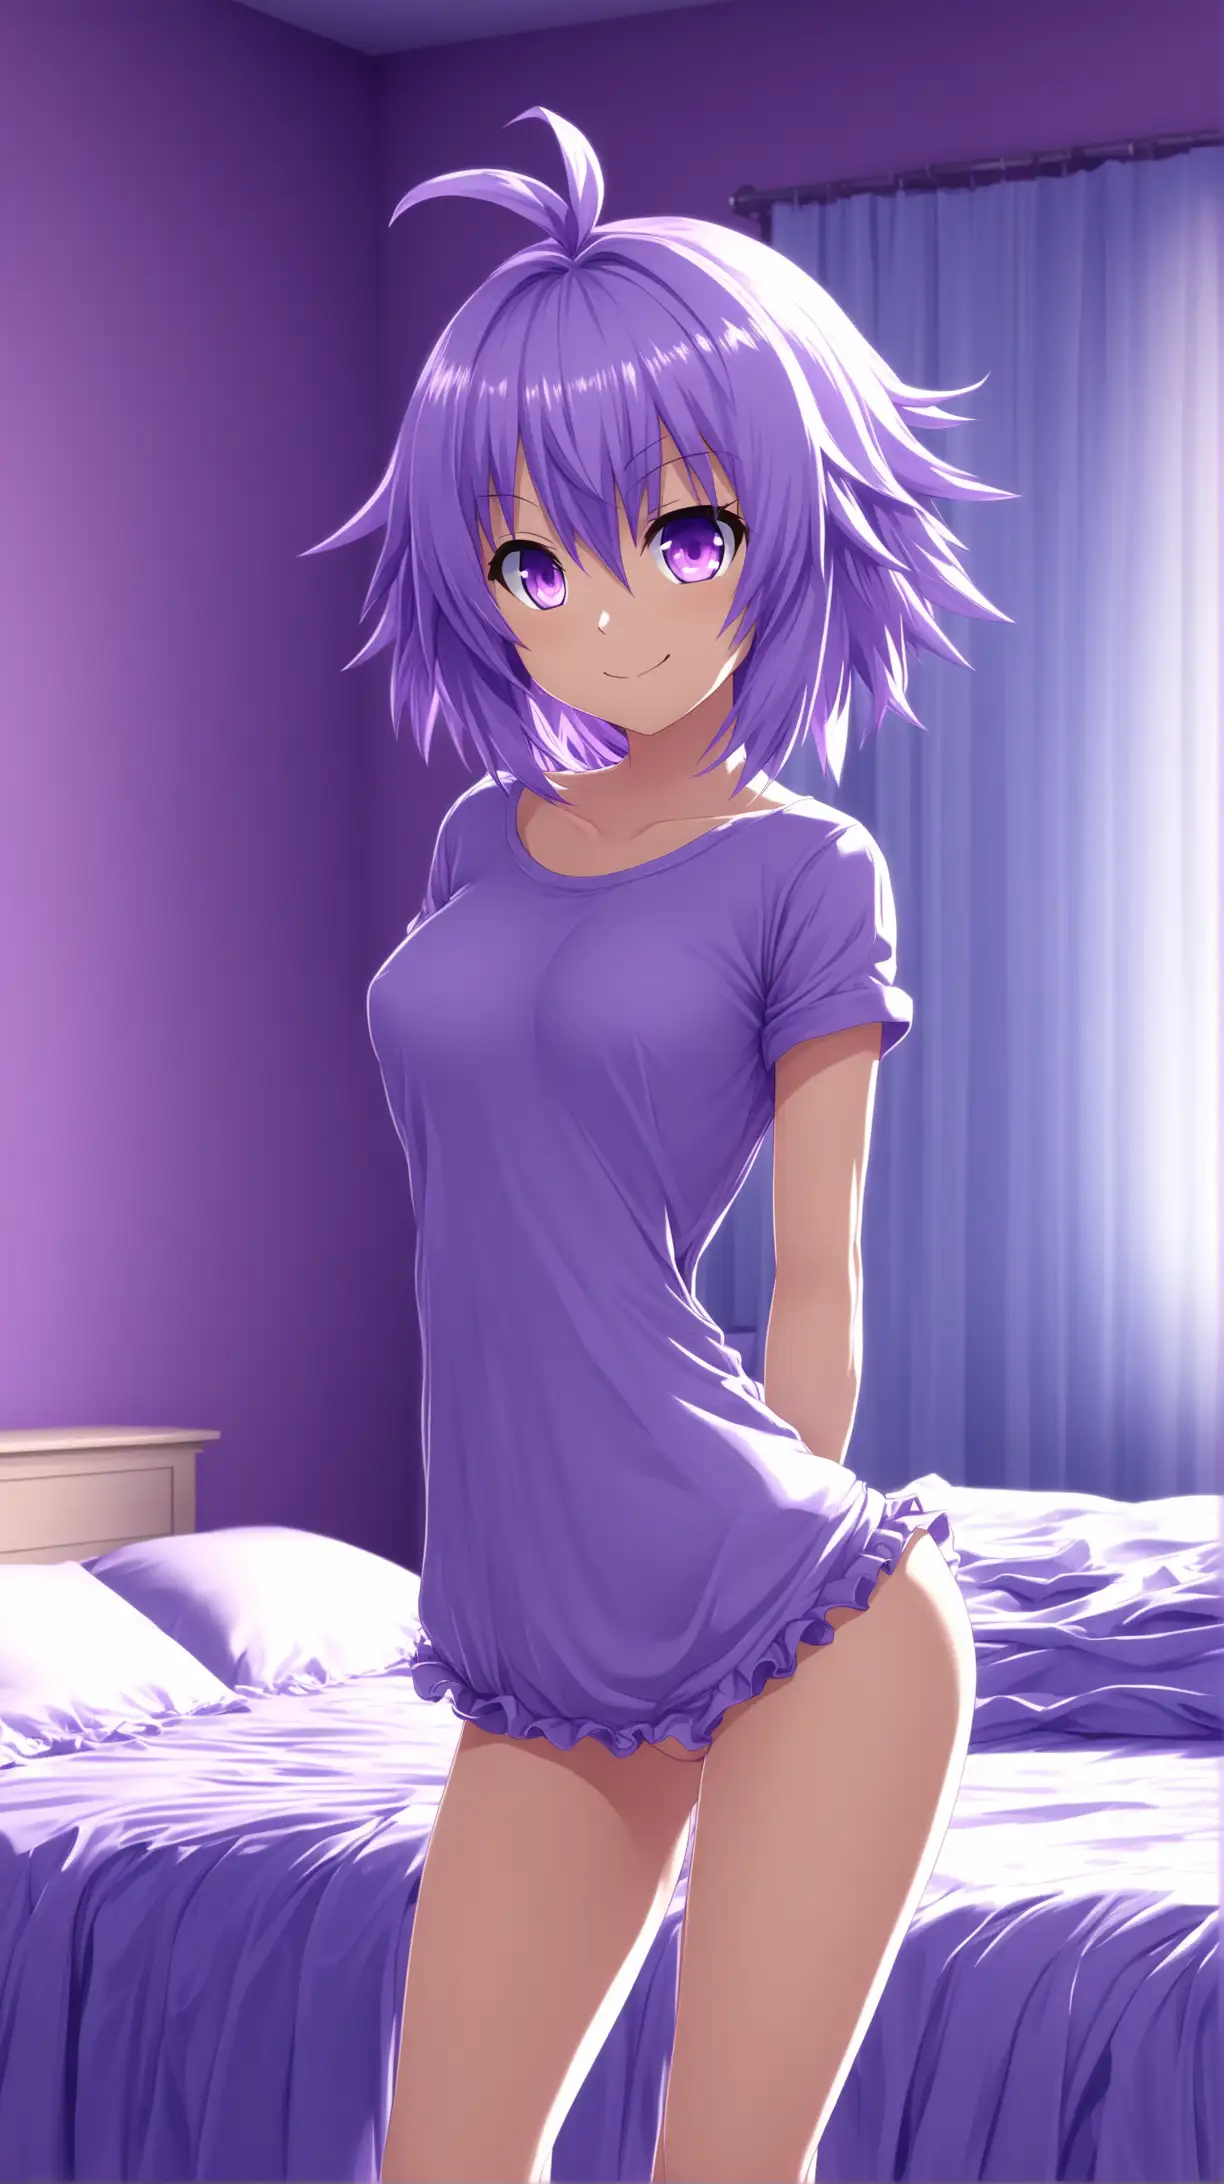 Draw a high quality picture of Neptune from Hyperdimension Neptunia, short lavender hair, purple eyes, lively, bouncy, perky figure, ambient lighting, long shot, seductive pose, indoors, bedroom, casual outfit, smiling at the viewer